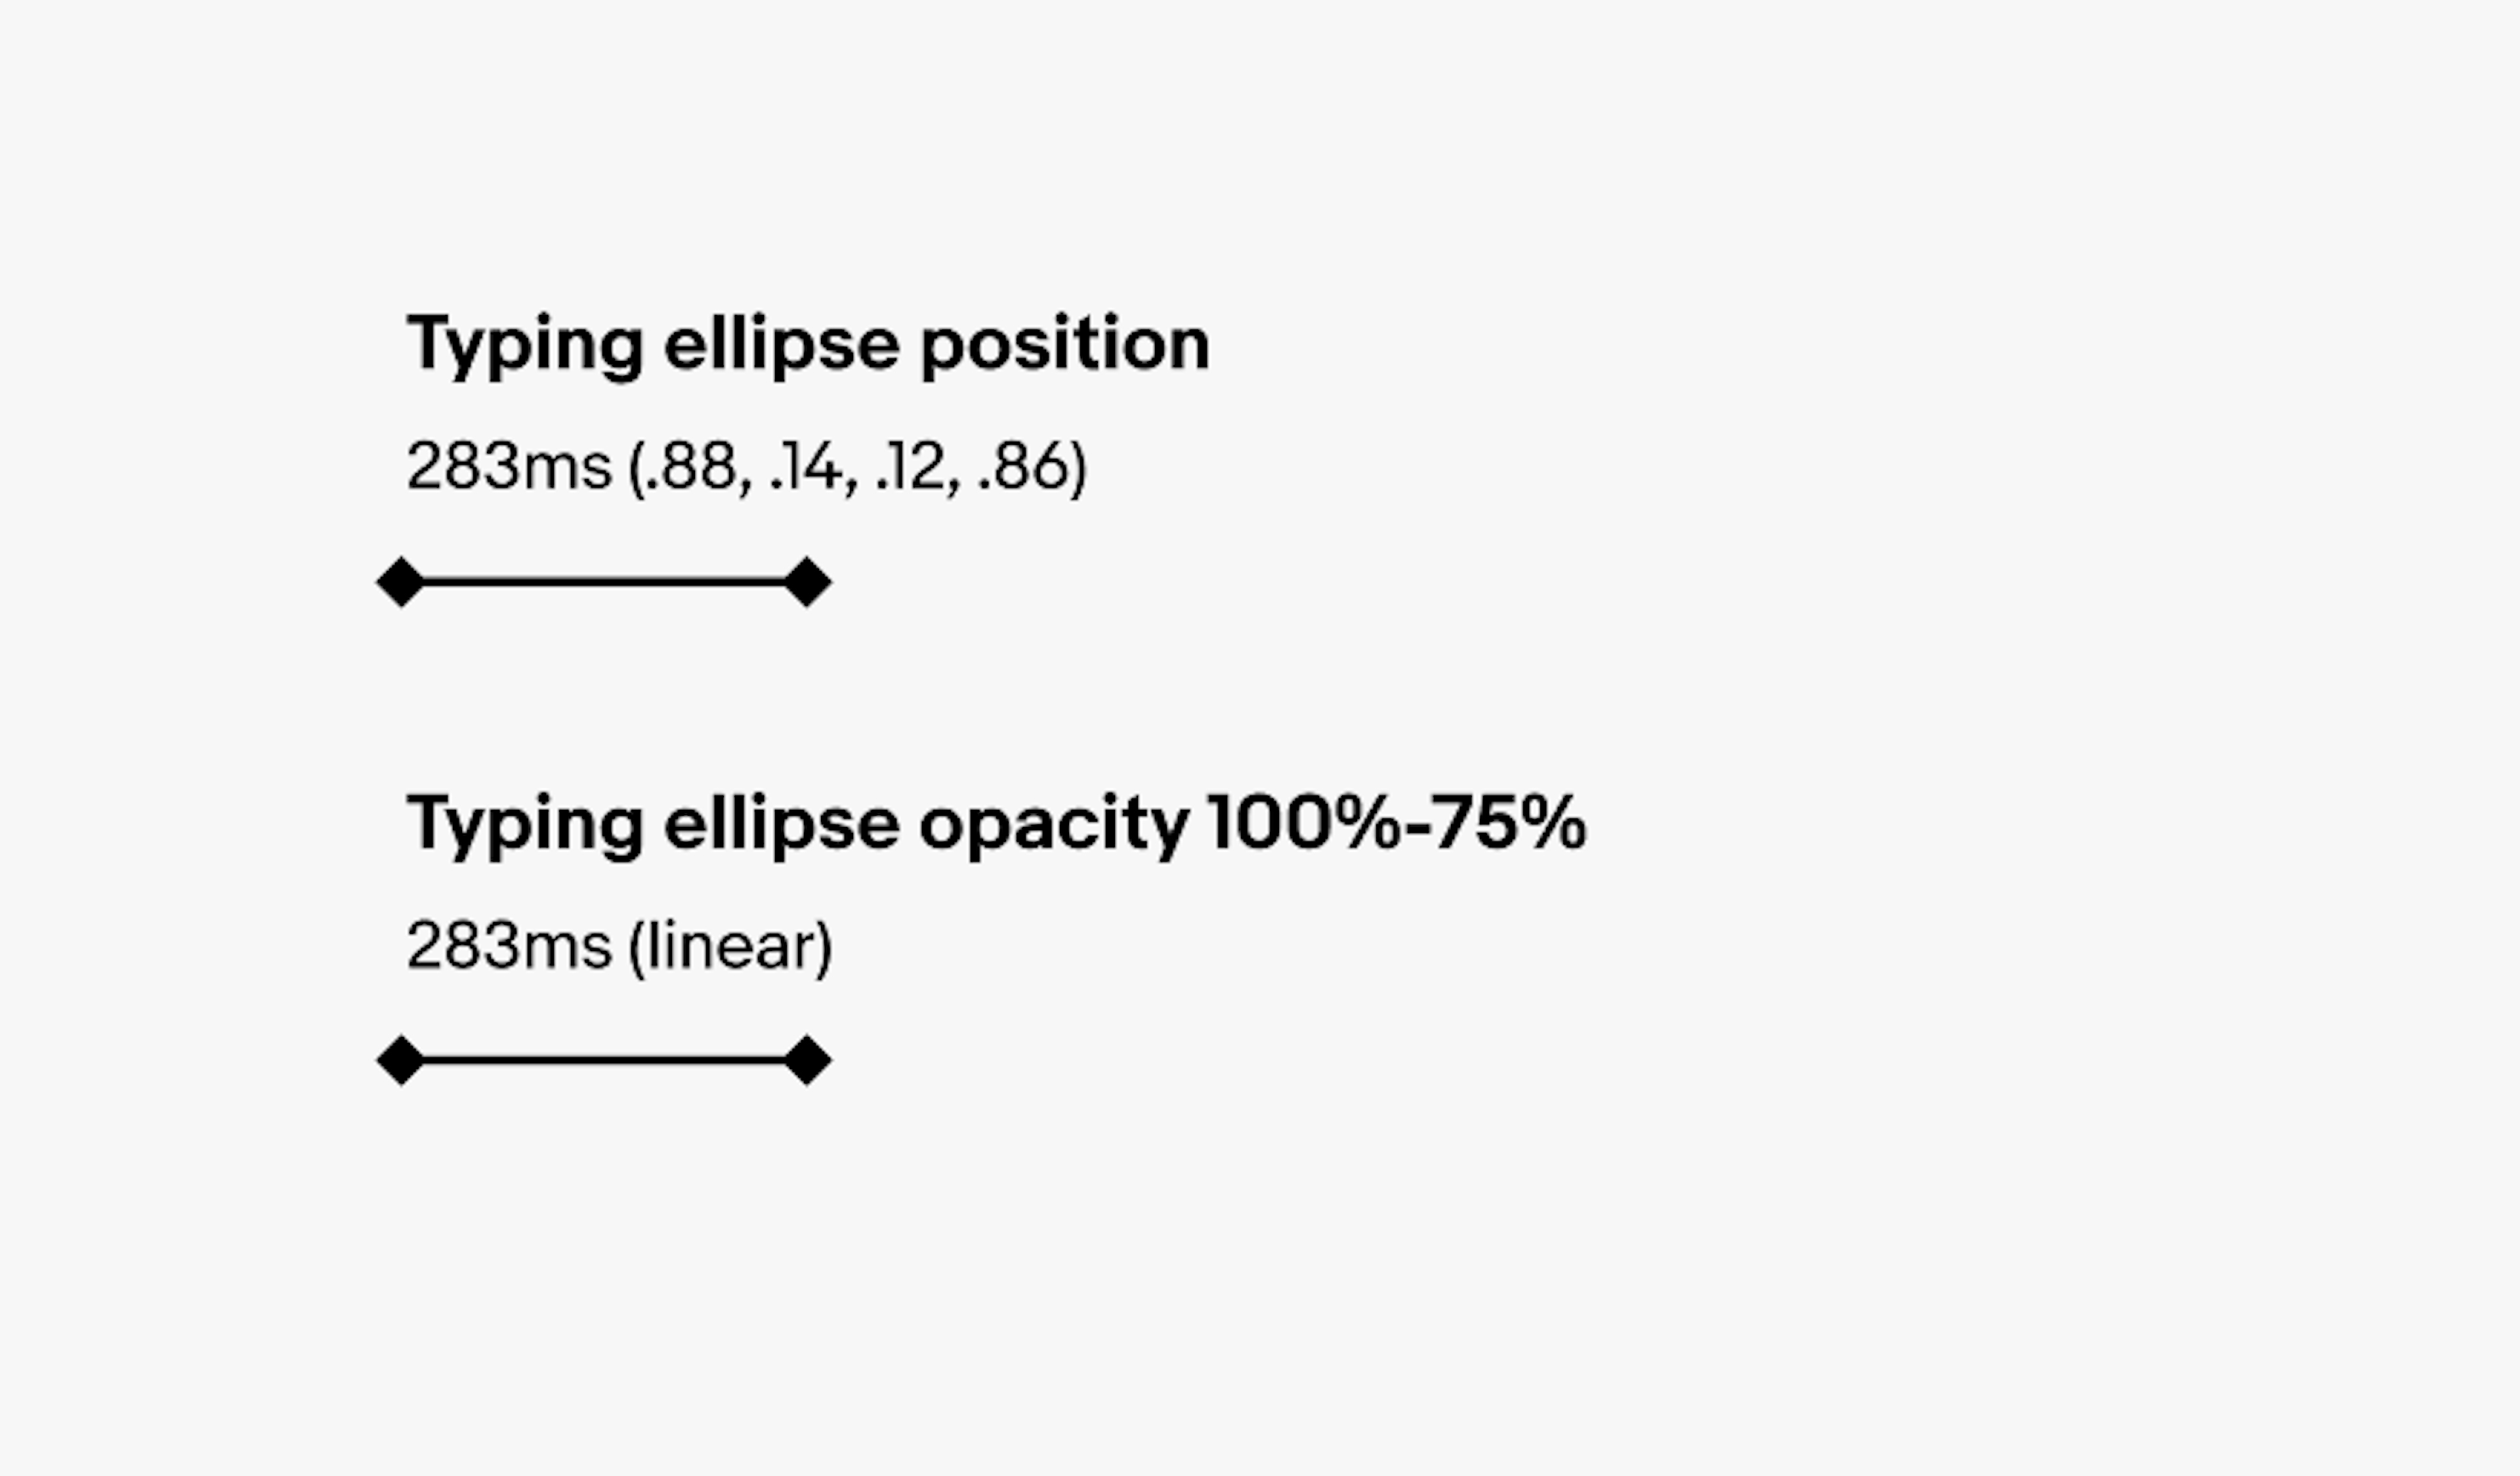 Two motion timeline graphics. The first is for typing ellipse position 283ms (.88, .14, .12, .86). The second is for typing ellipse opacity 100%-75% 283ms (linear).